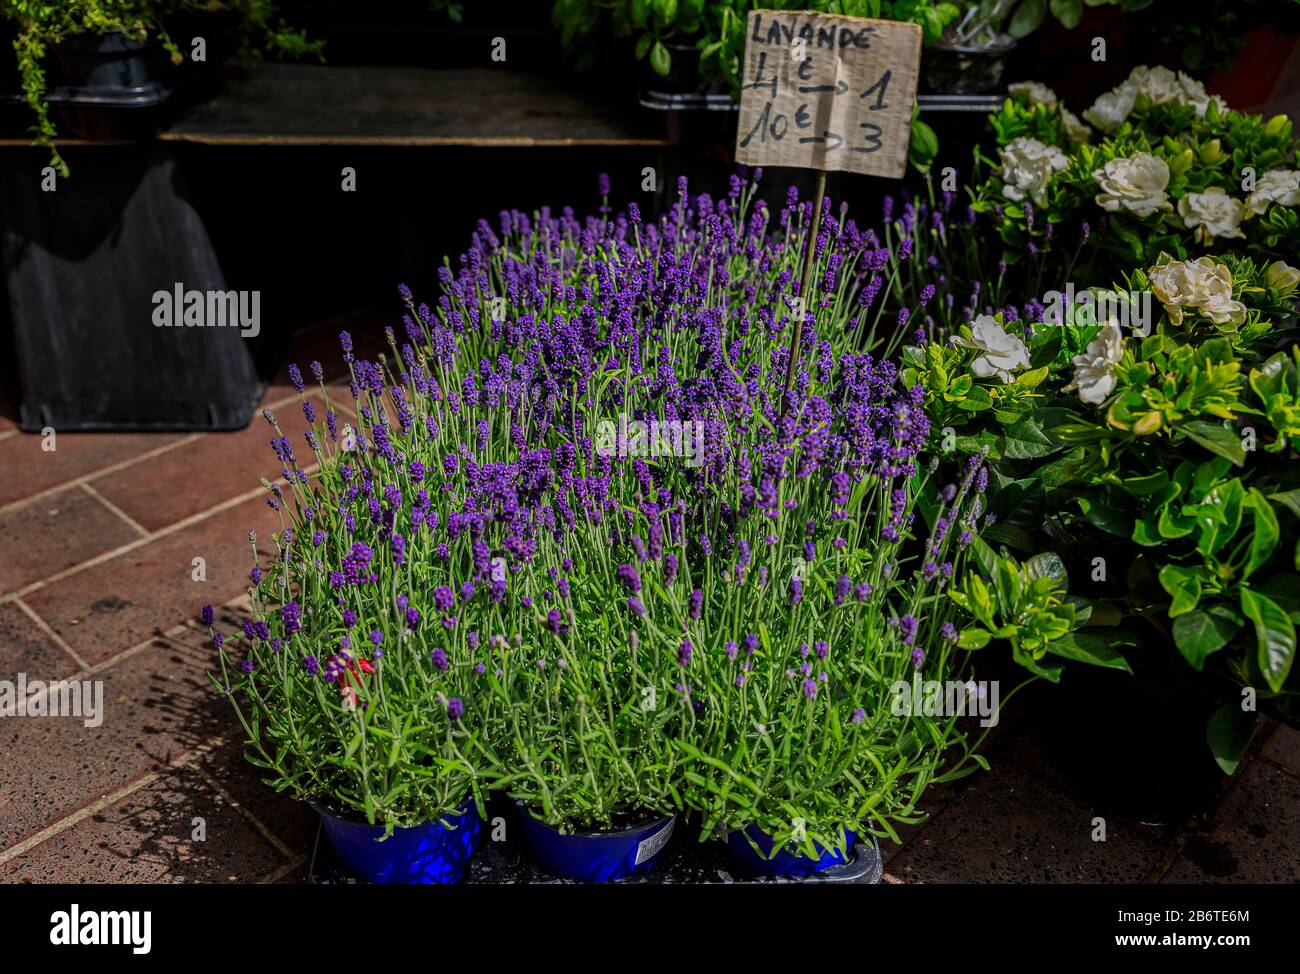 Colorful potted lavender plants in bloom at market at a market in Nice, in the South of France with the price sign of 4 EUR for 1 or 10EUR for 3 Stock Photo